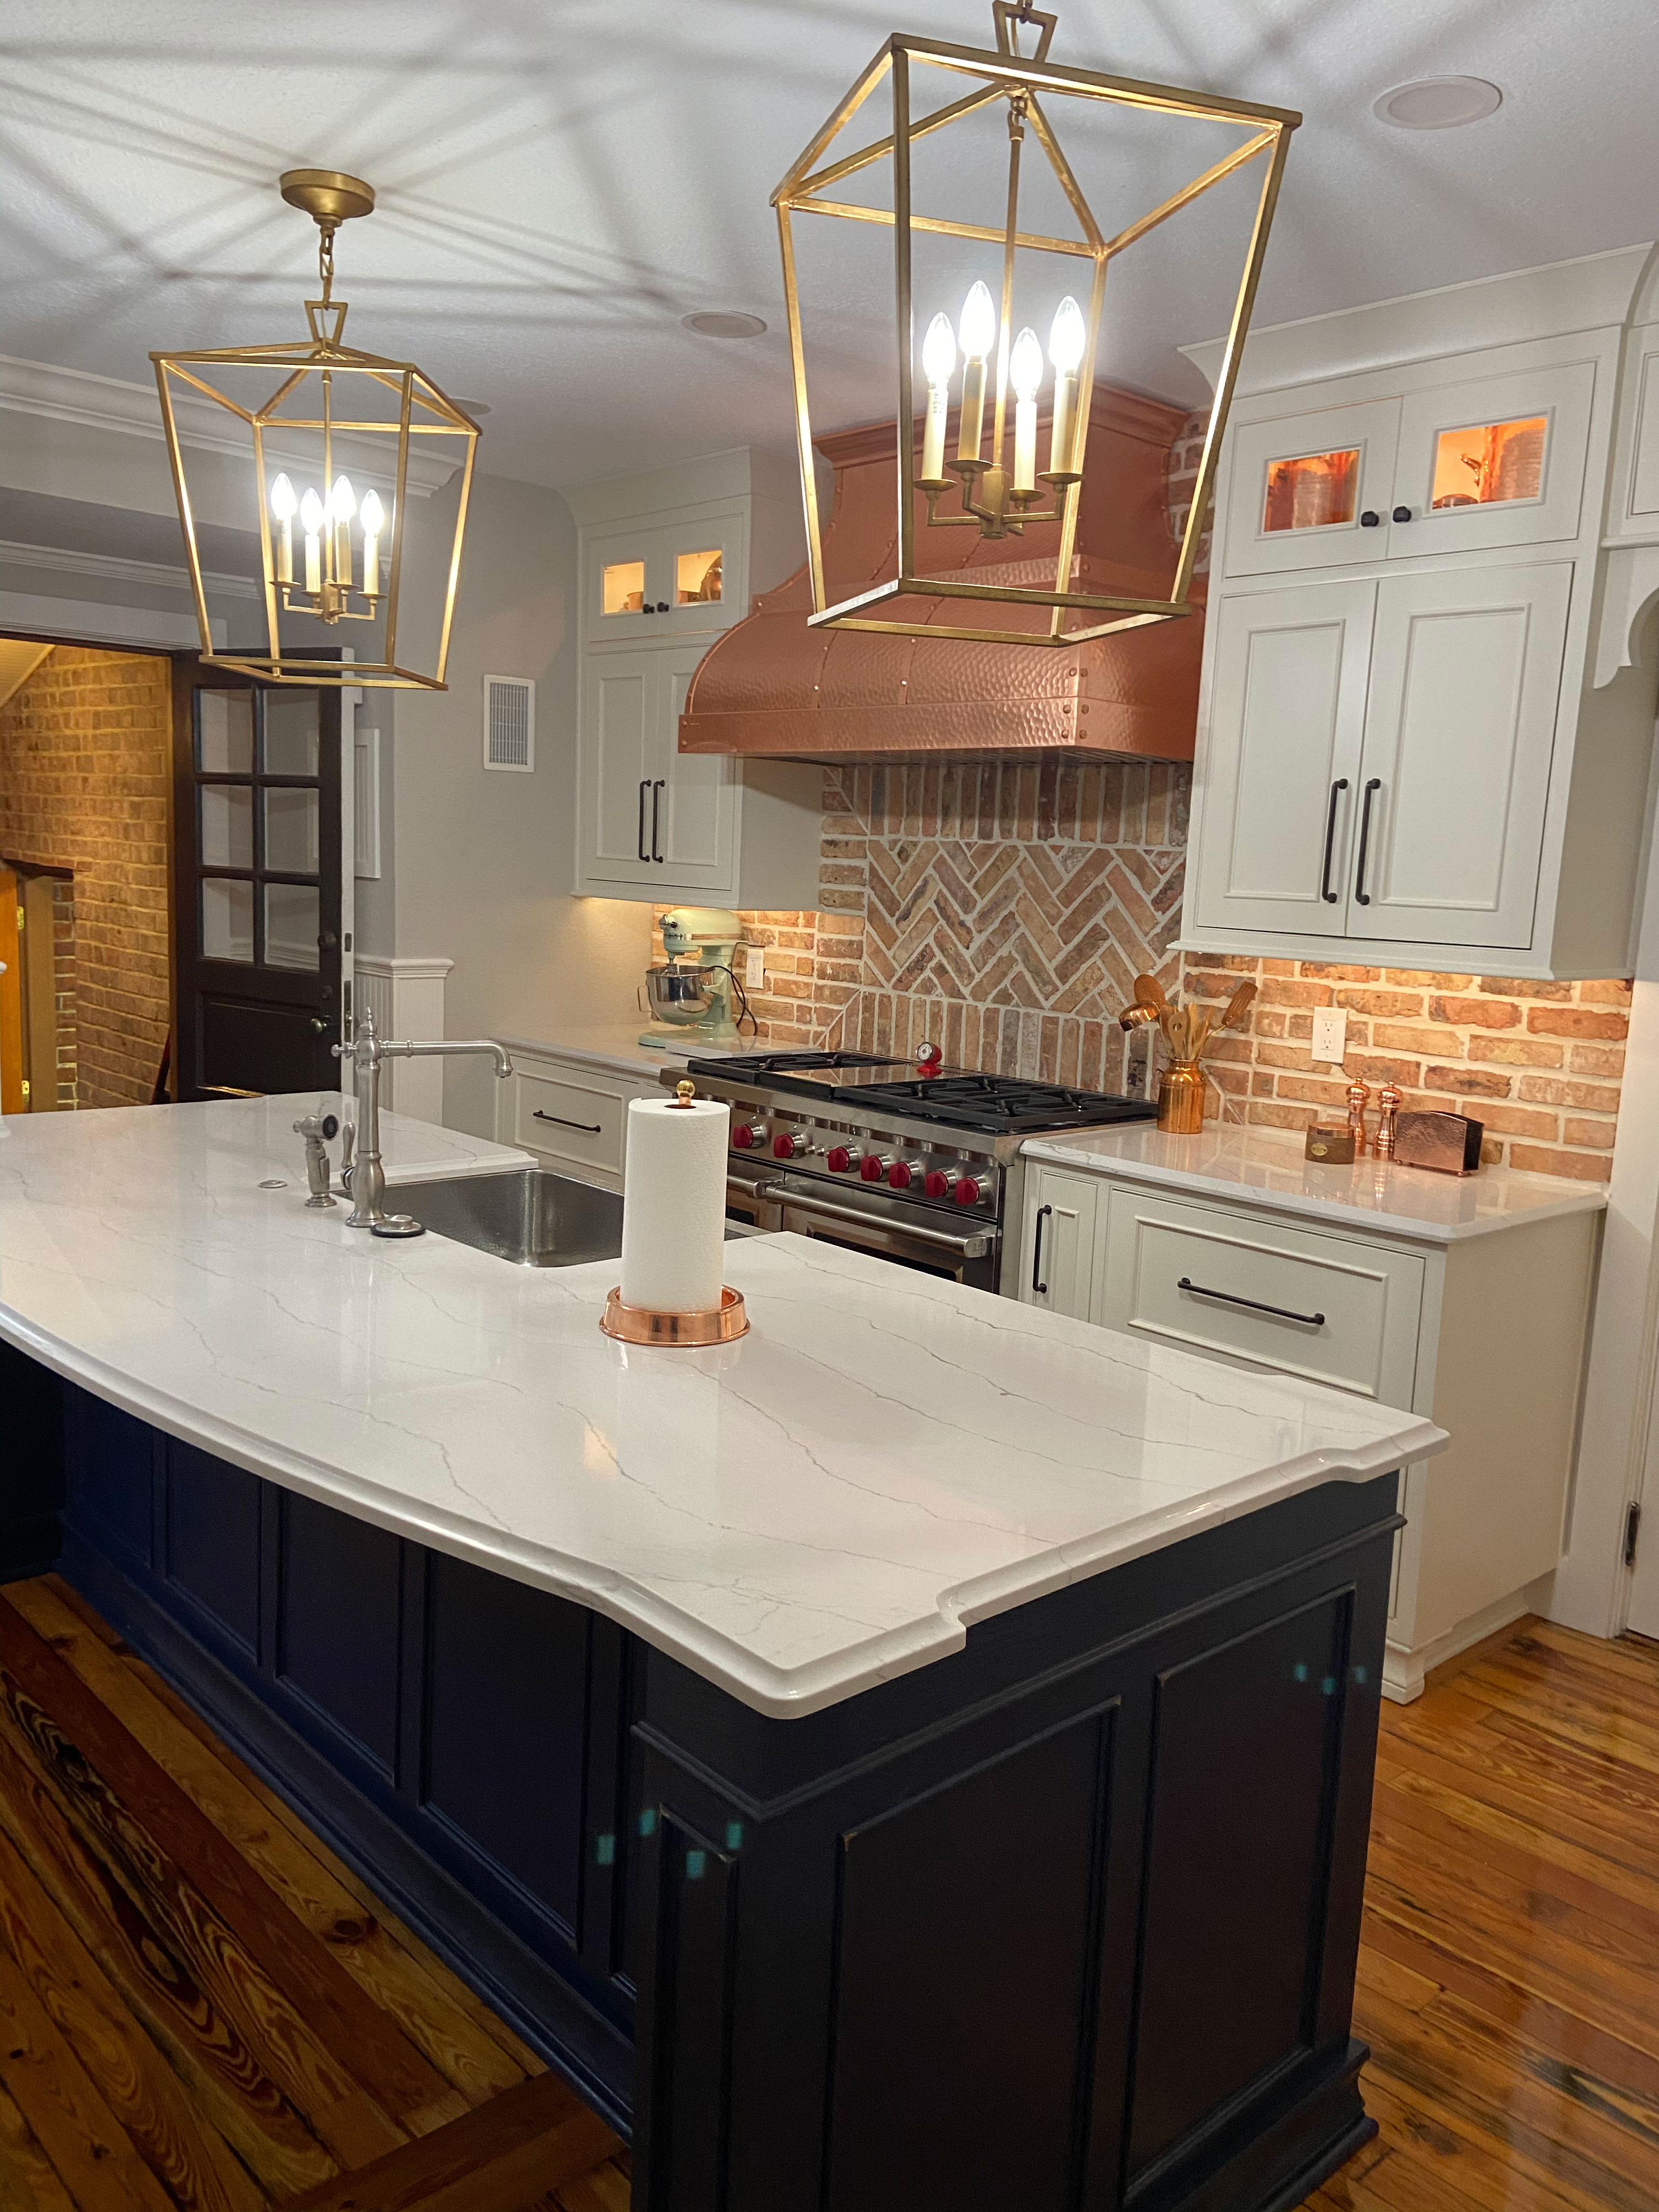 Solid copper range hood in kitchen with exposed brick wall